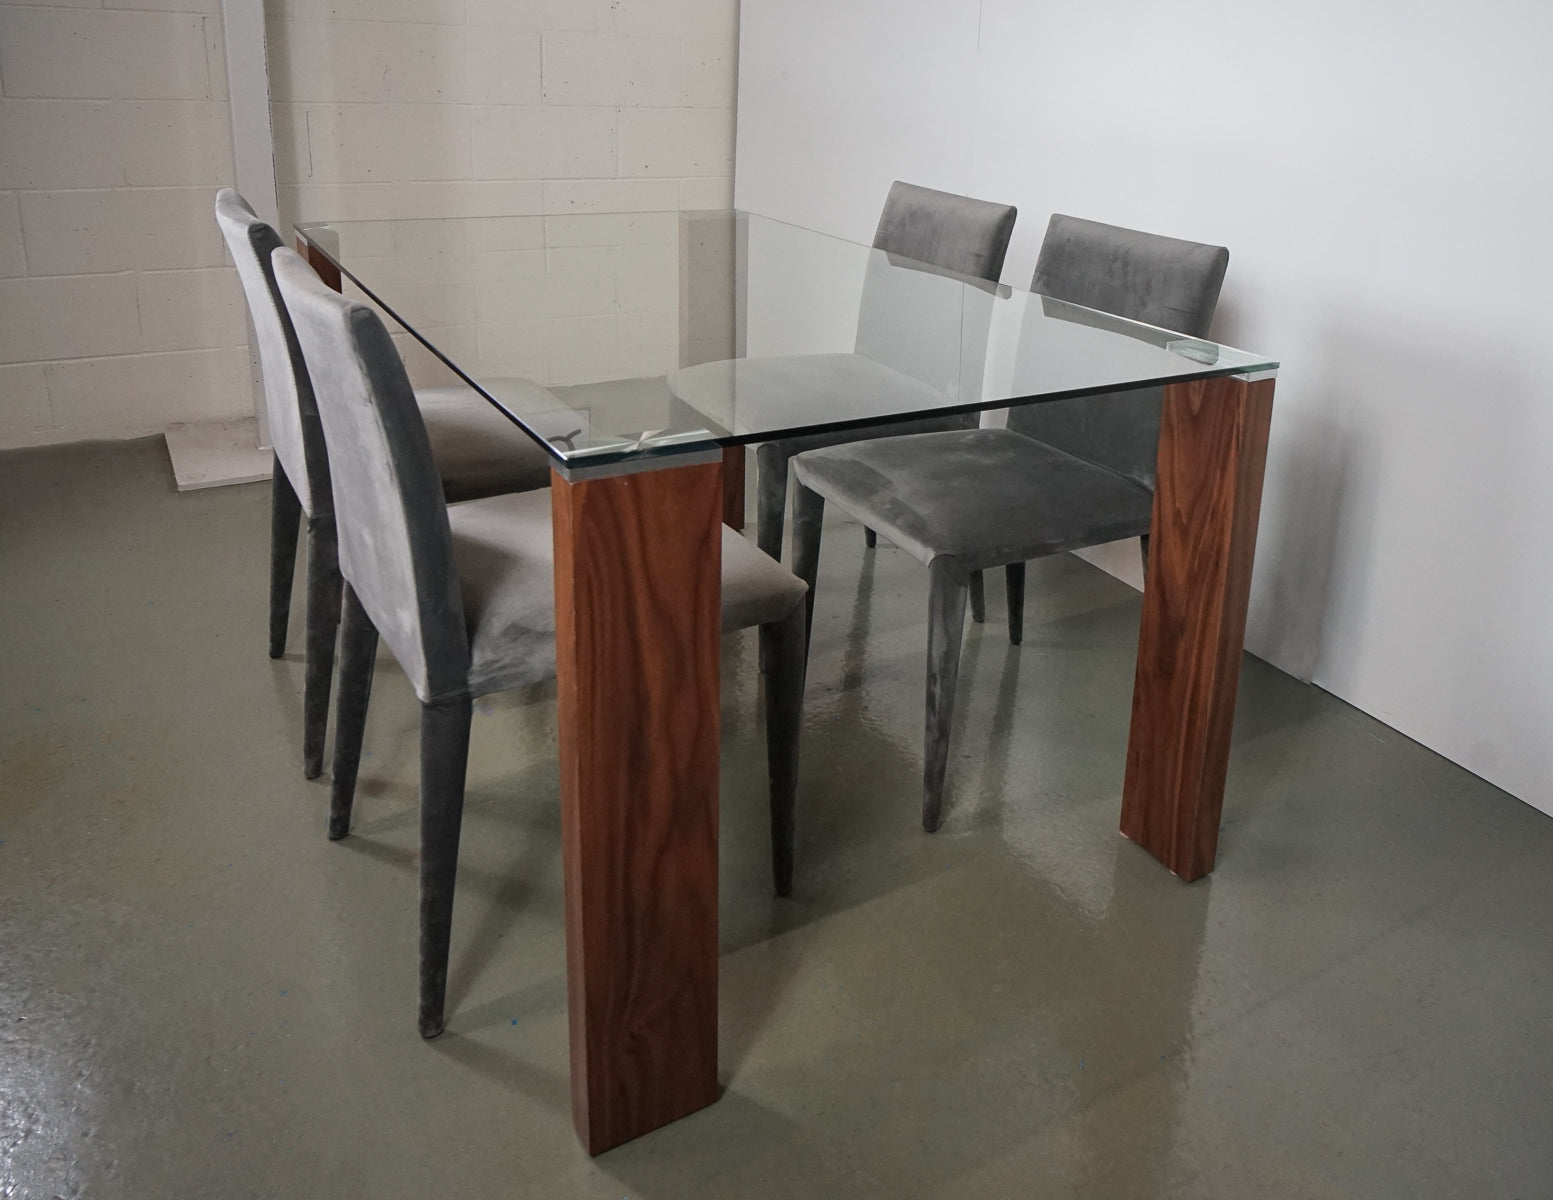 Dwell Dining Table and Chairs